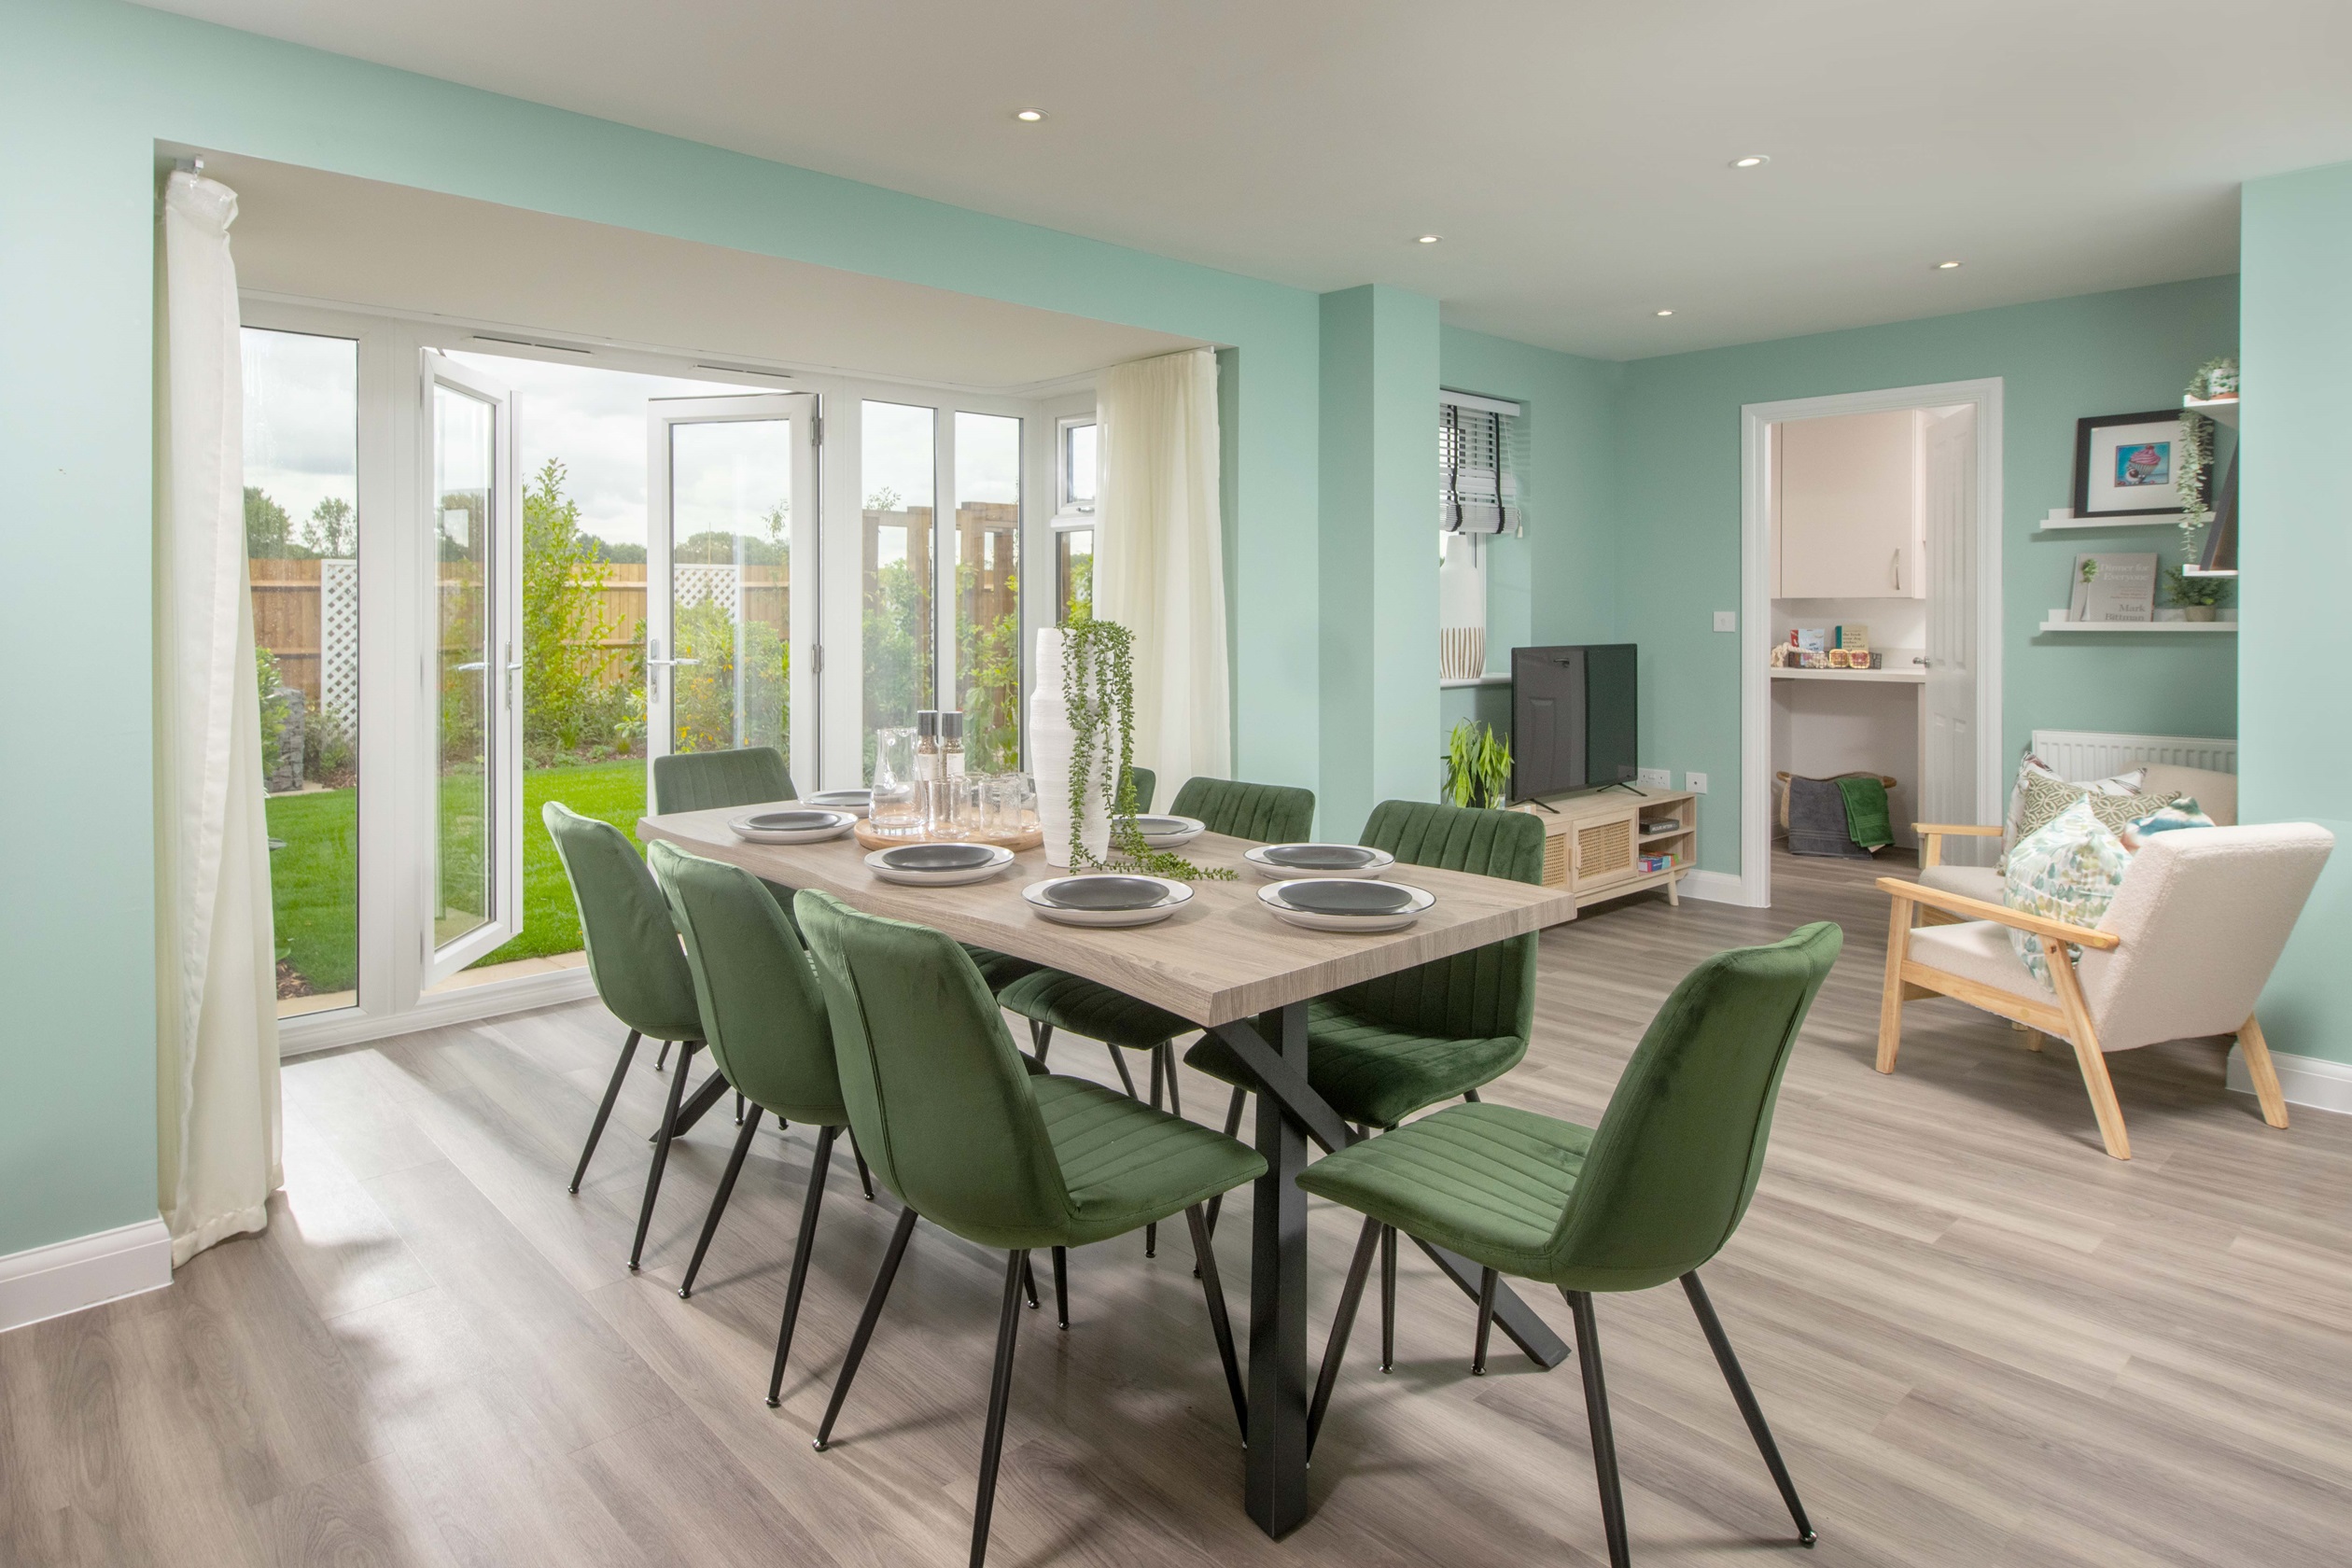 Property 3 of 9. Open-Plan Kitchen-Diner With French Doors